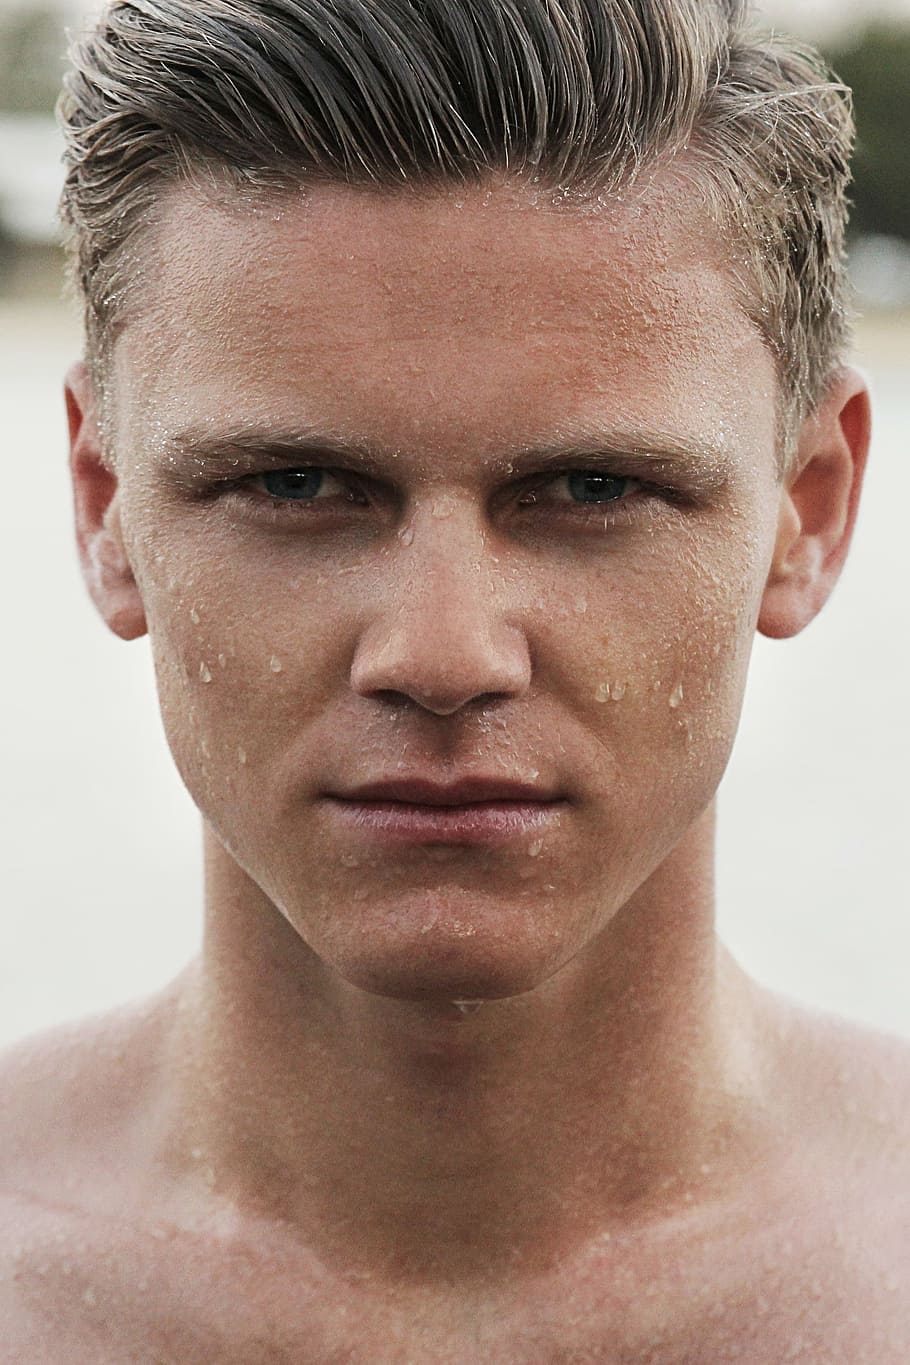 man, water droplets, face, wet, male, head, person, caucasian, attractive, looking